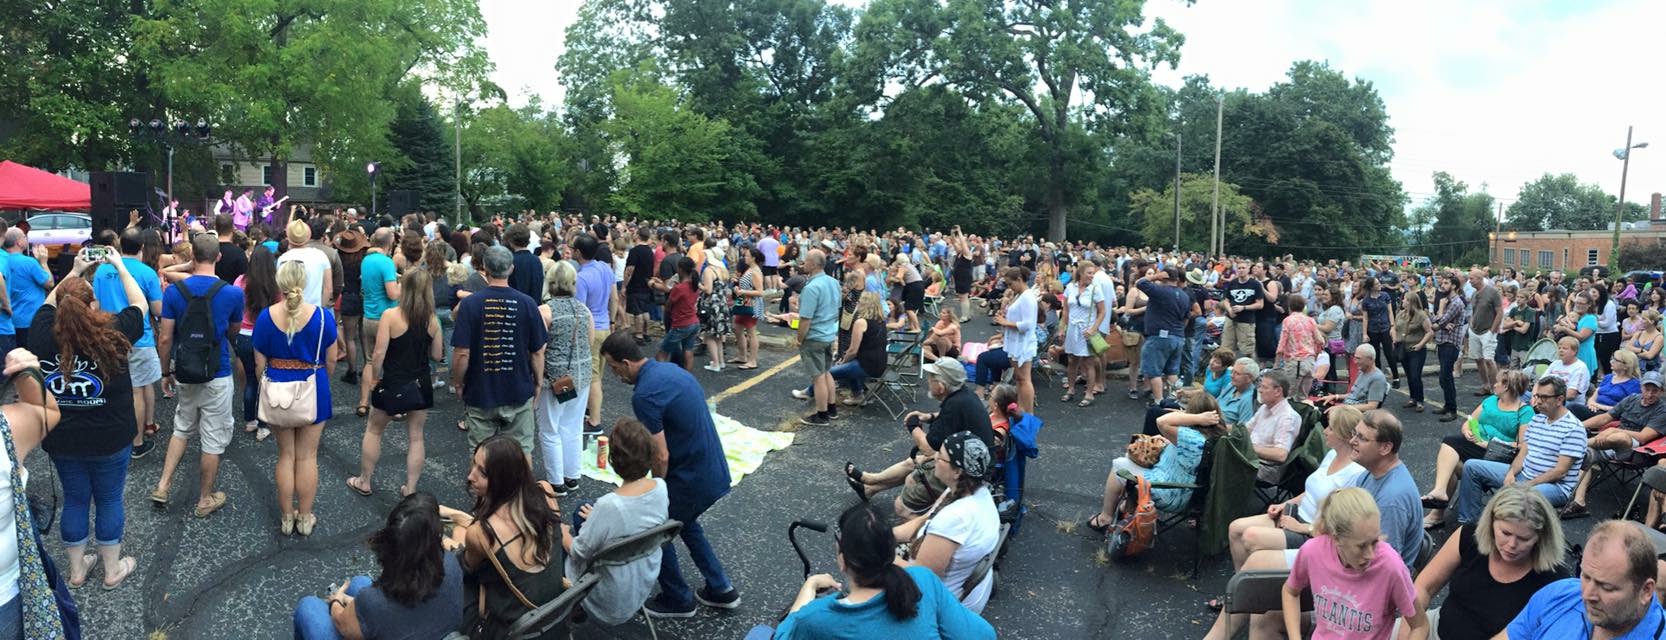 Porch Rokr: Neighborhood music festival in Akron, Ohio, attracts almost